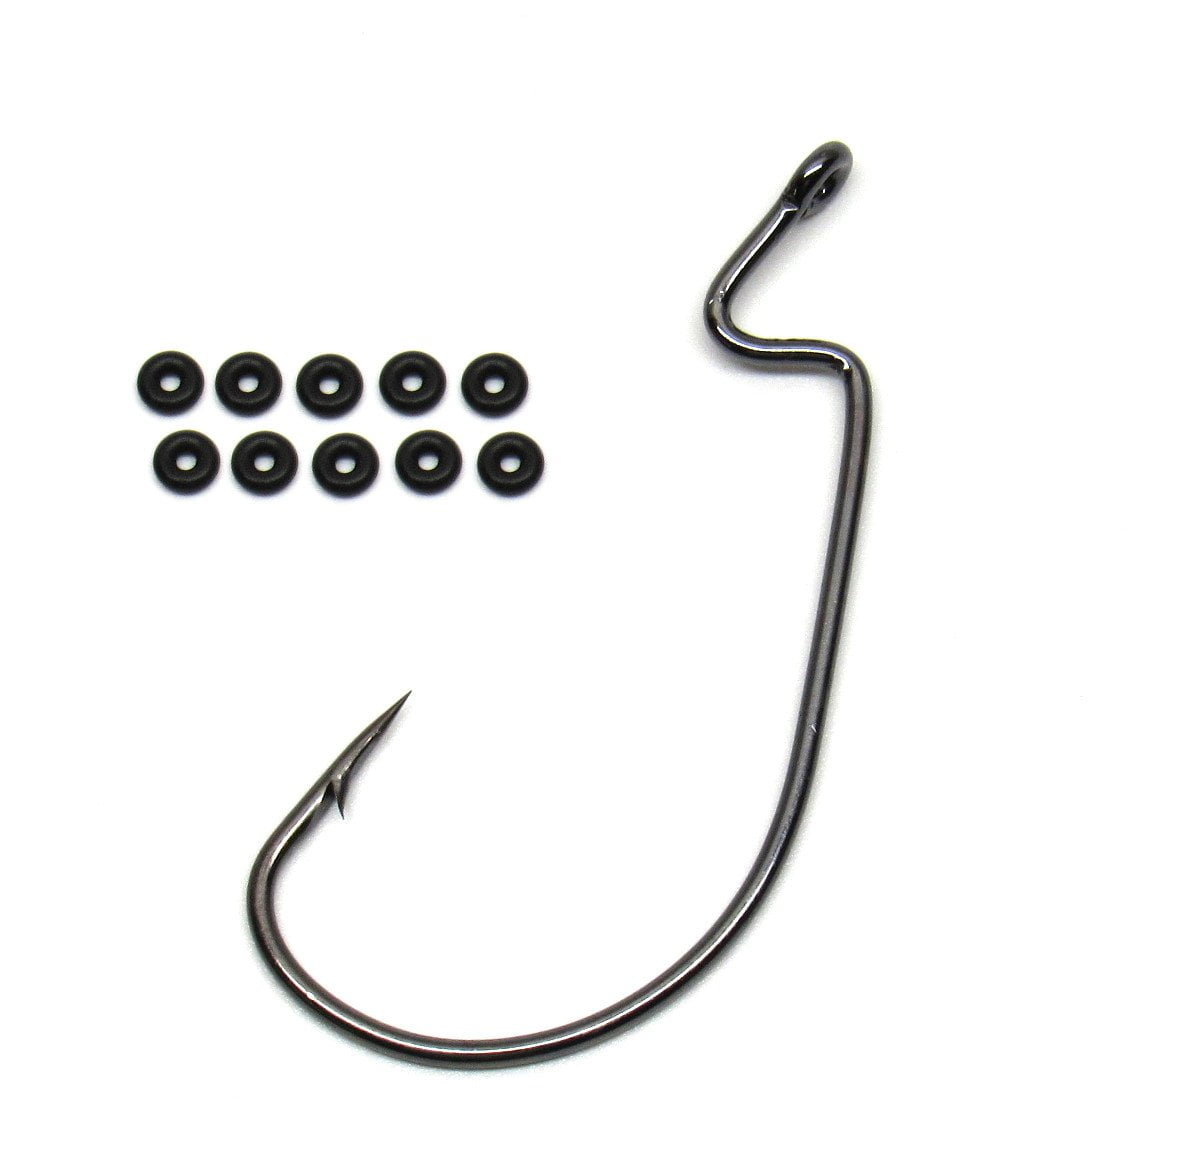 OWNER OFFSET WORM HOOK 5101 BASS FISHING WORM HOOK SELECT SIZE 